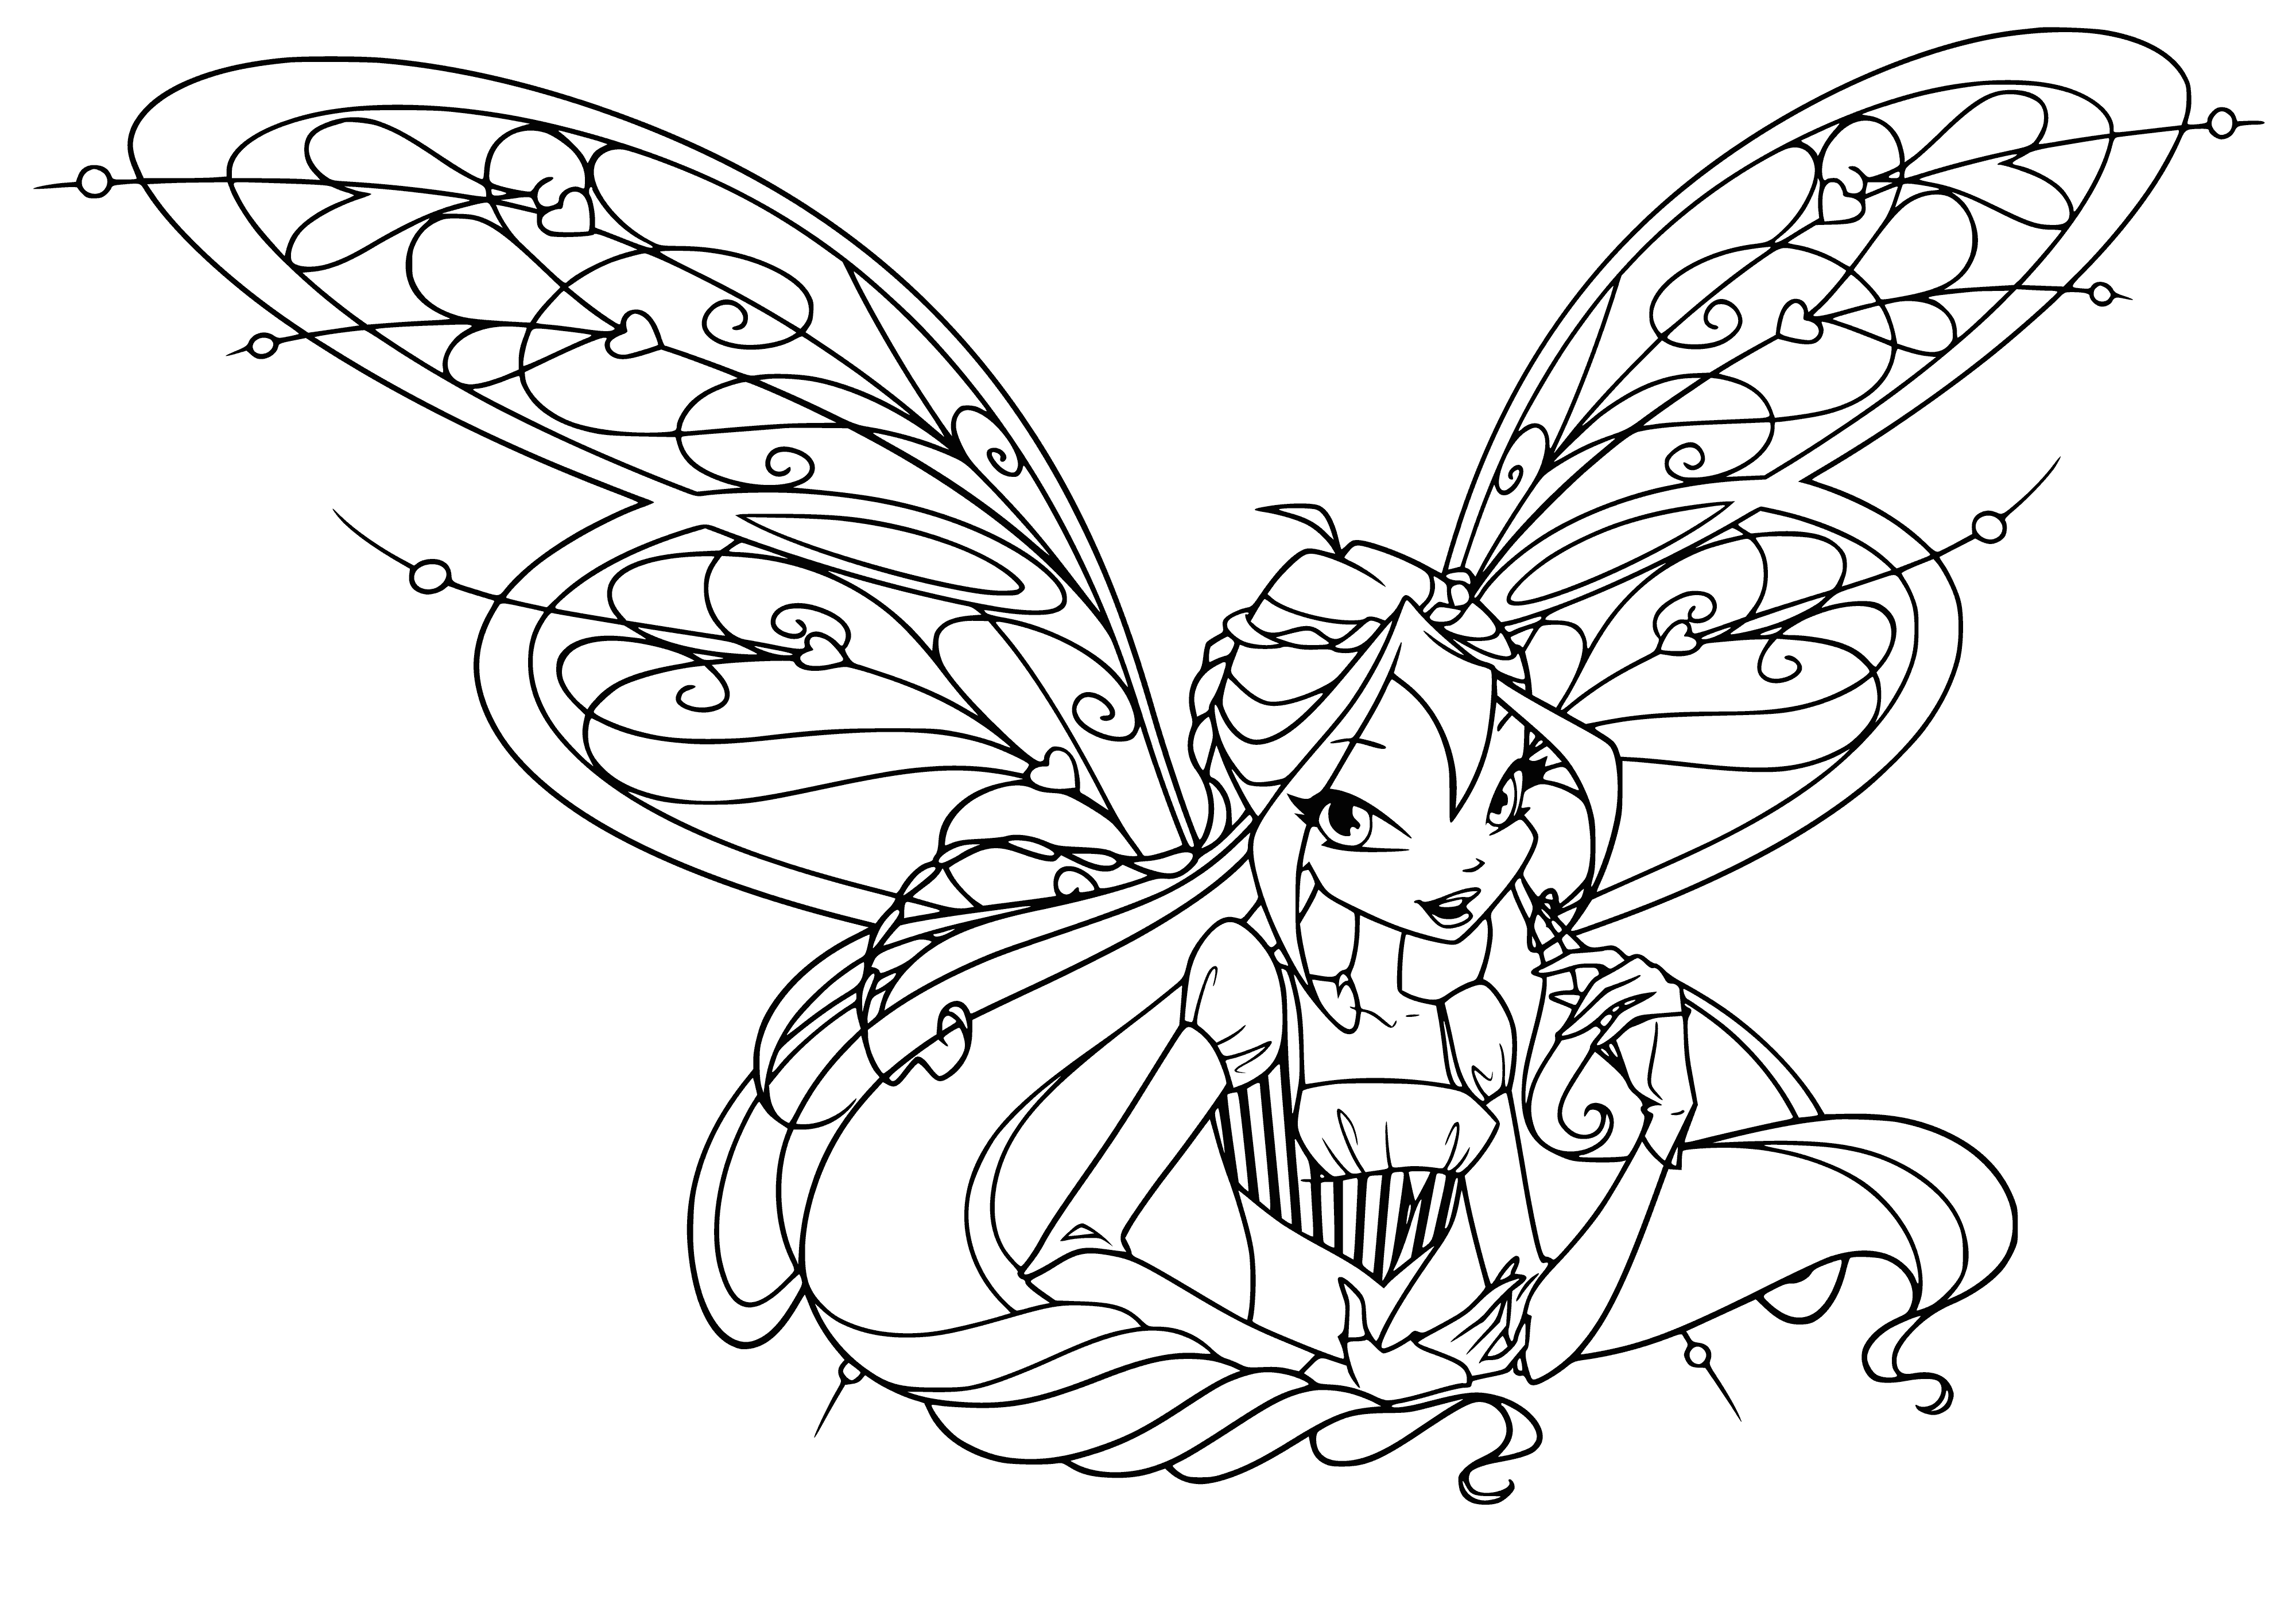 coloring page: Bloom stands in a field w/ arms and whip outstretched, surrounded by swirling green aura. She wears a green dress and hair's wild and free. #MagicalGirl